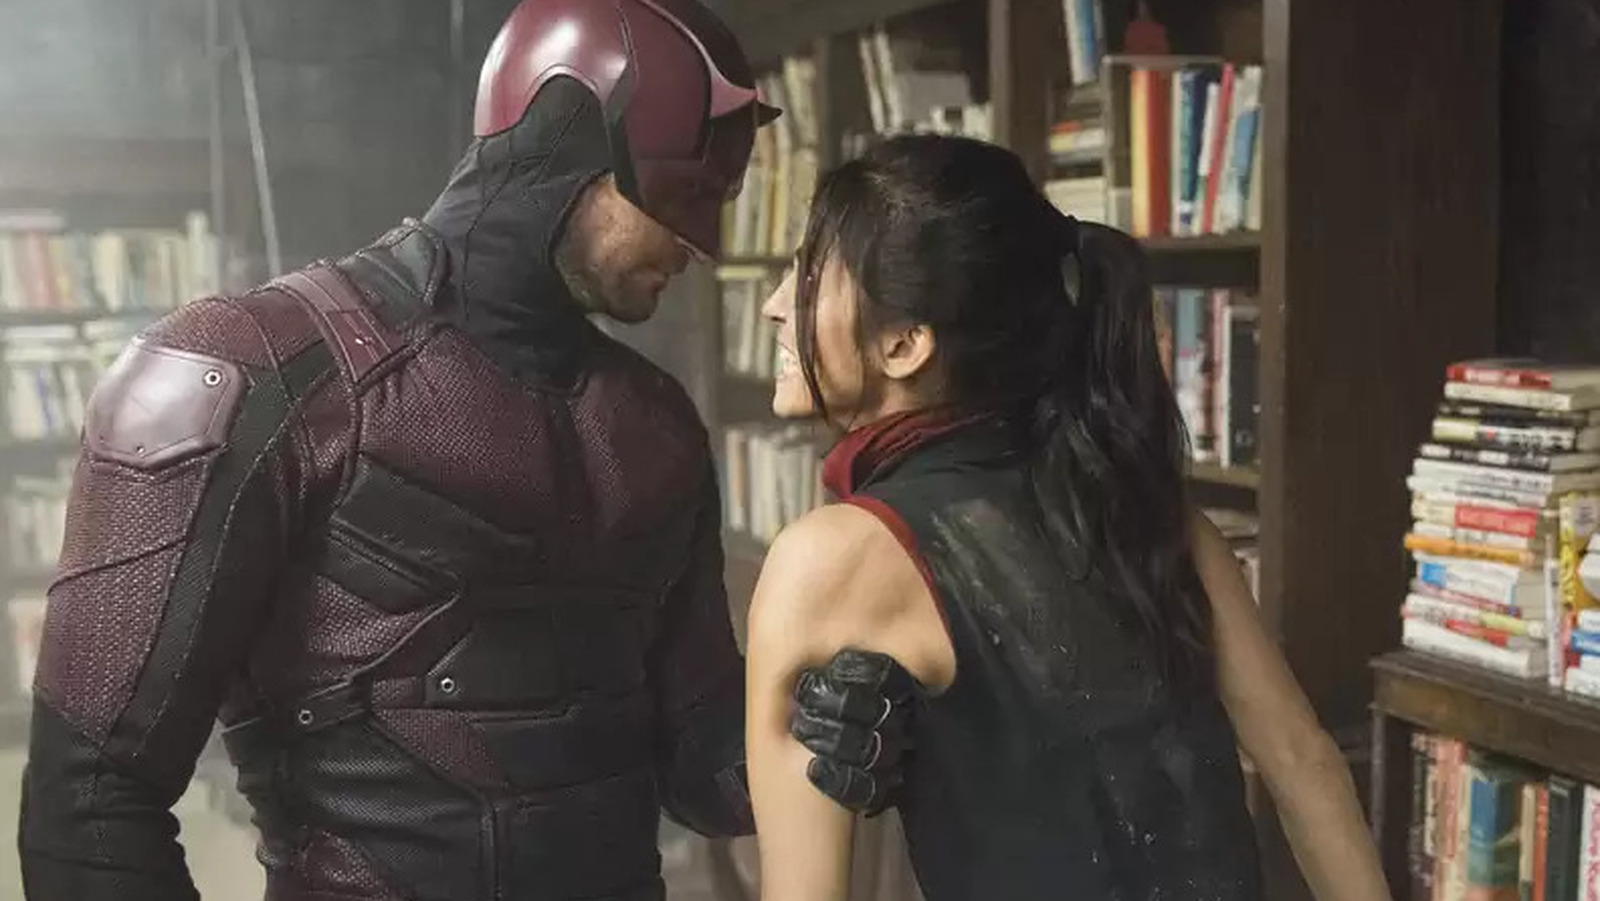 #Dressing Up As Daredevil Had Its Downsides For Charlie Cox